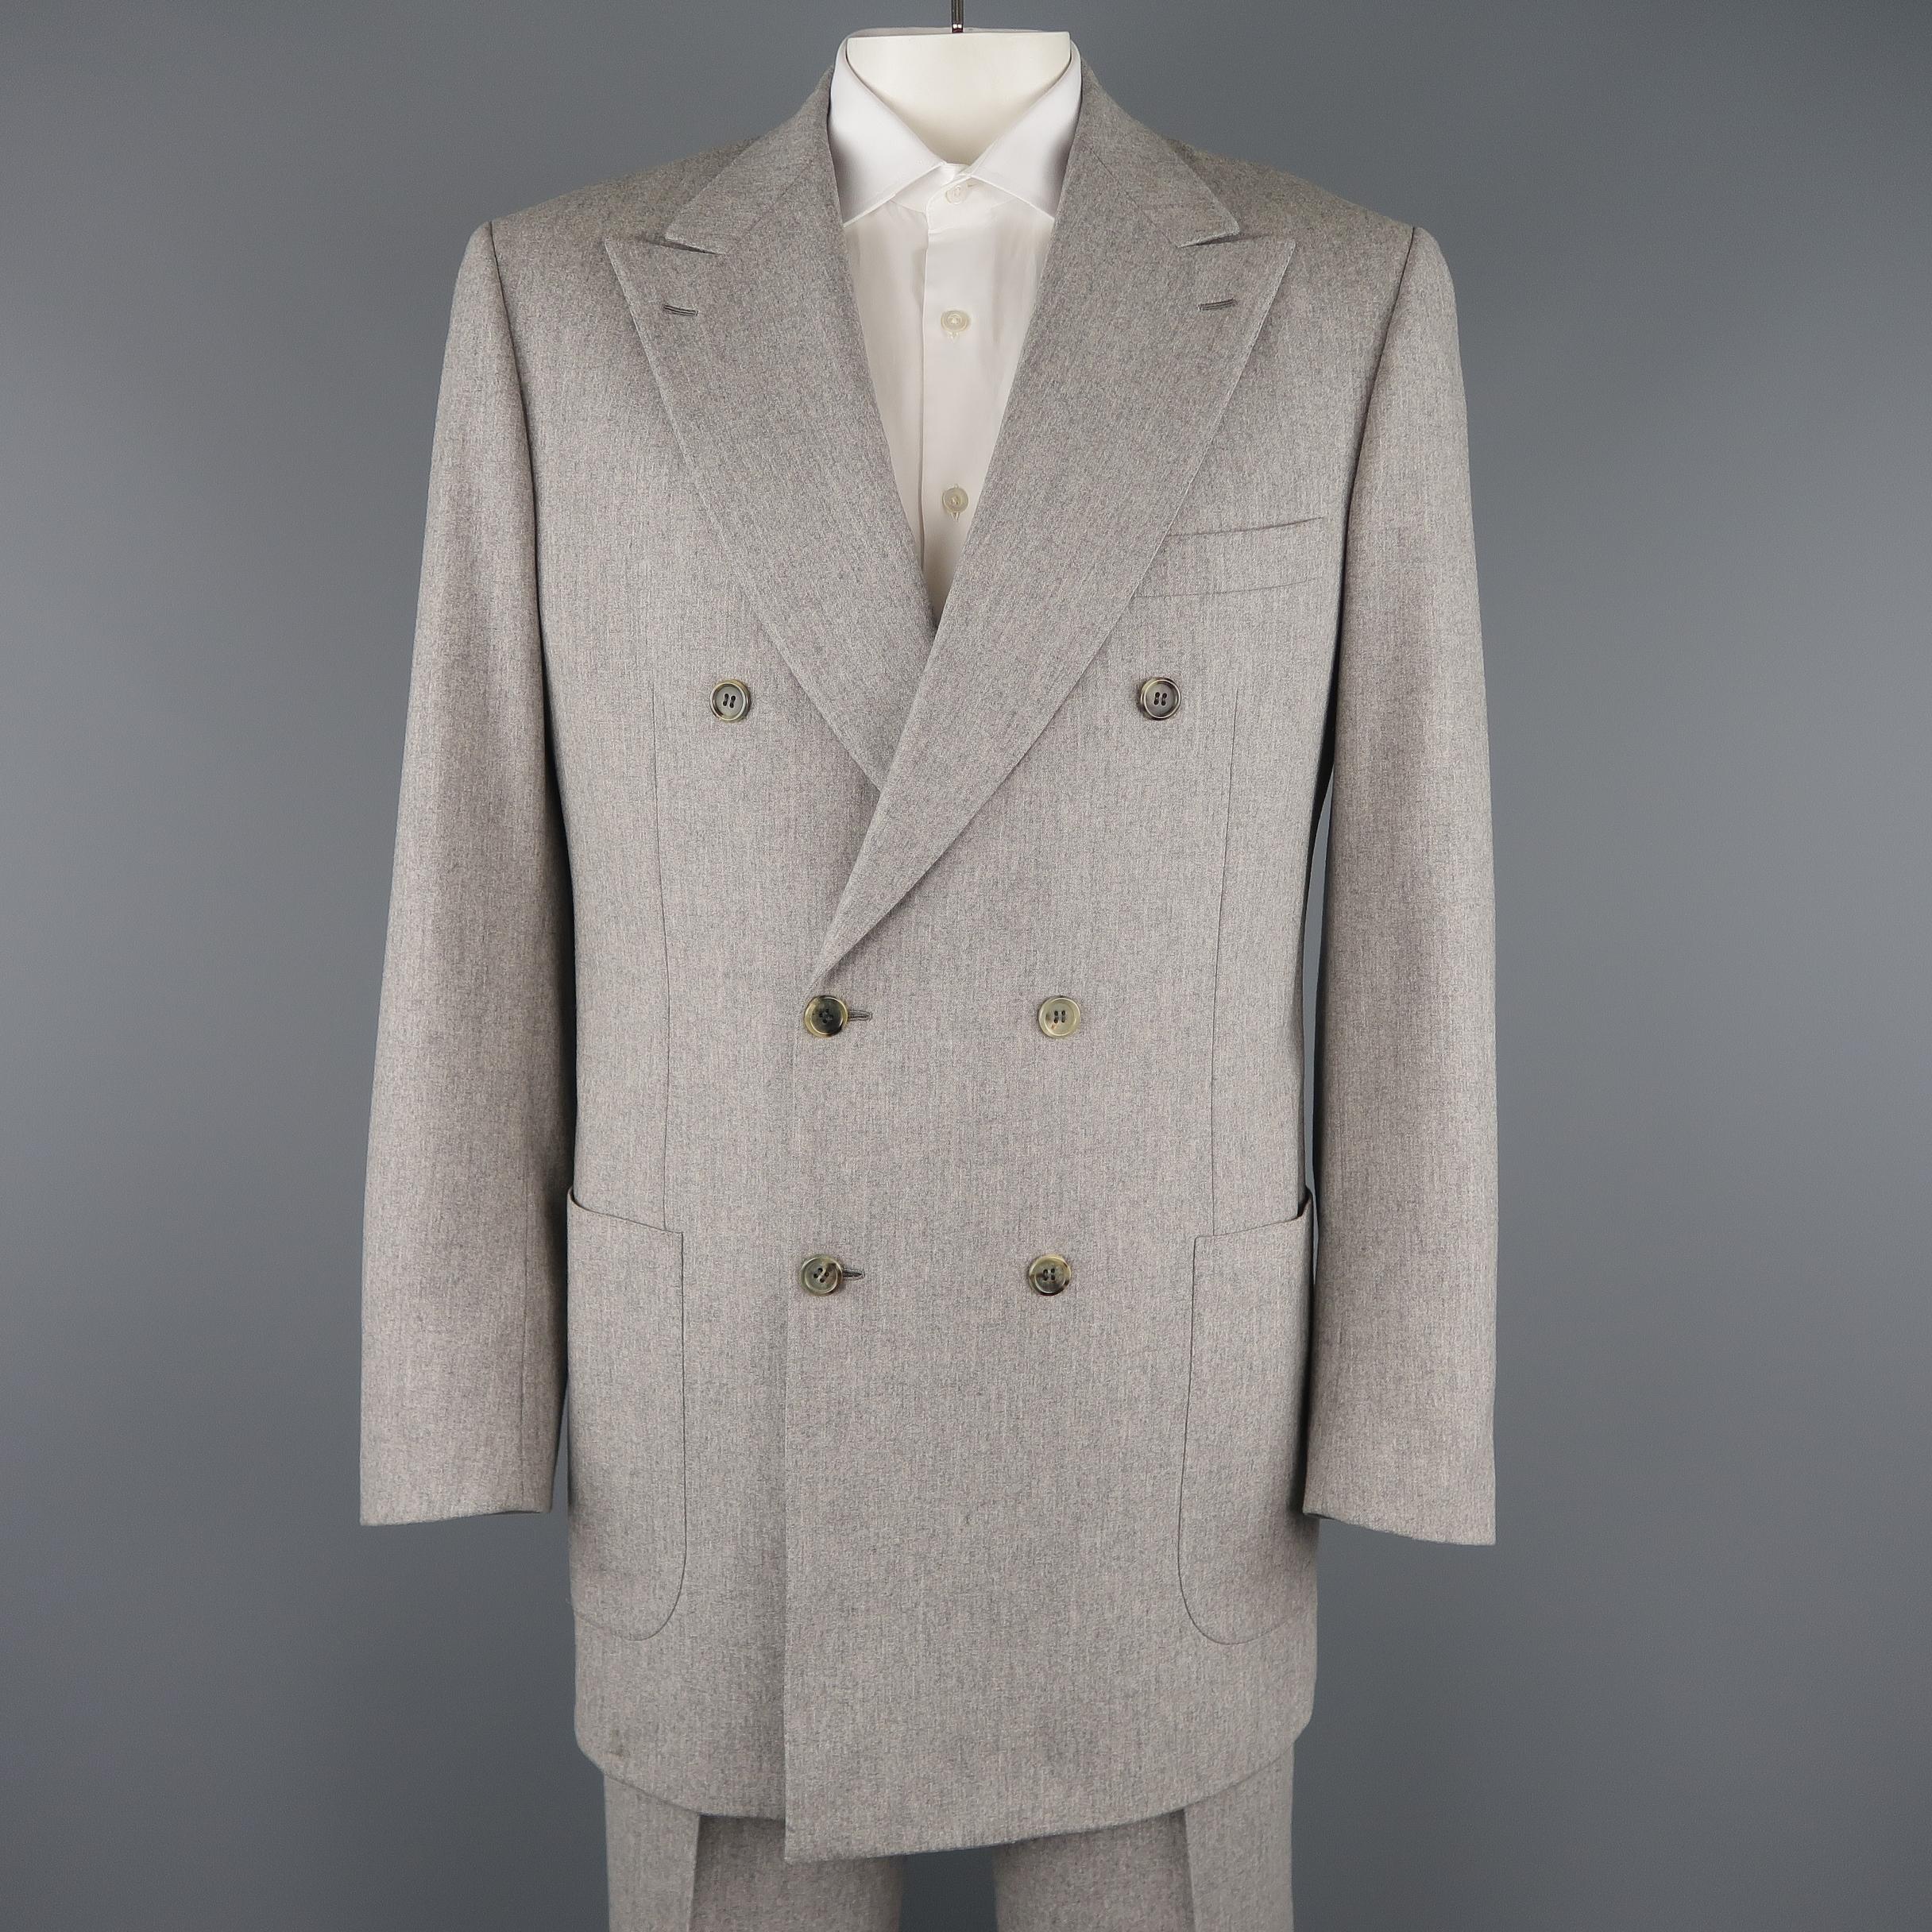 BRIONI suit comes in light heather gray wool and includes a double breasted, peak lapel sport coat with functional button cuffs and gorgeous paisley liner with matching flat front, cuffed hem trousers. 

Made in Italy. 
Excellent Pre-Owned